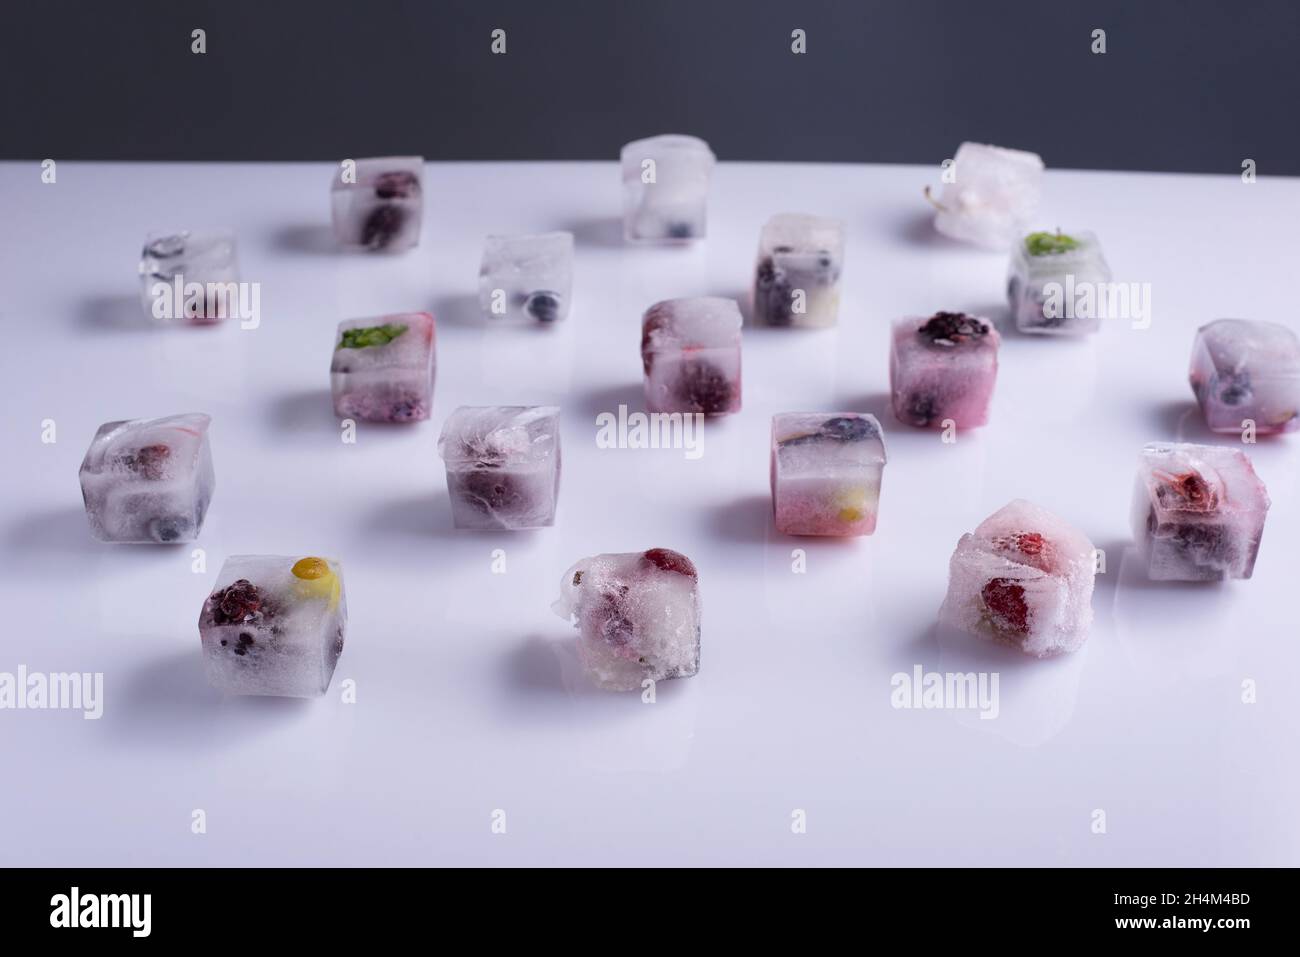 frozen fresh berries fruits in ice cubes on white background. Stock Photo